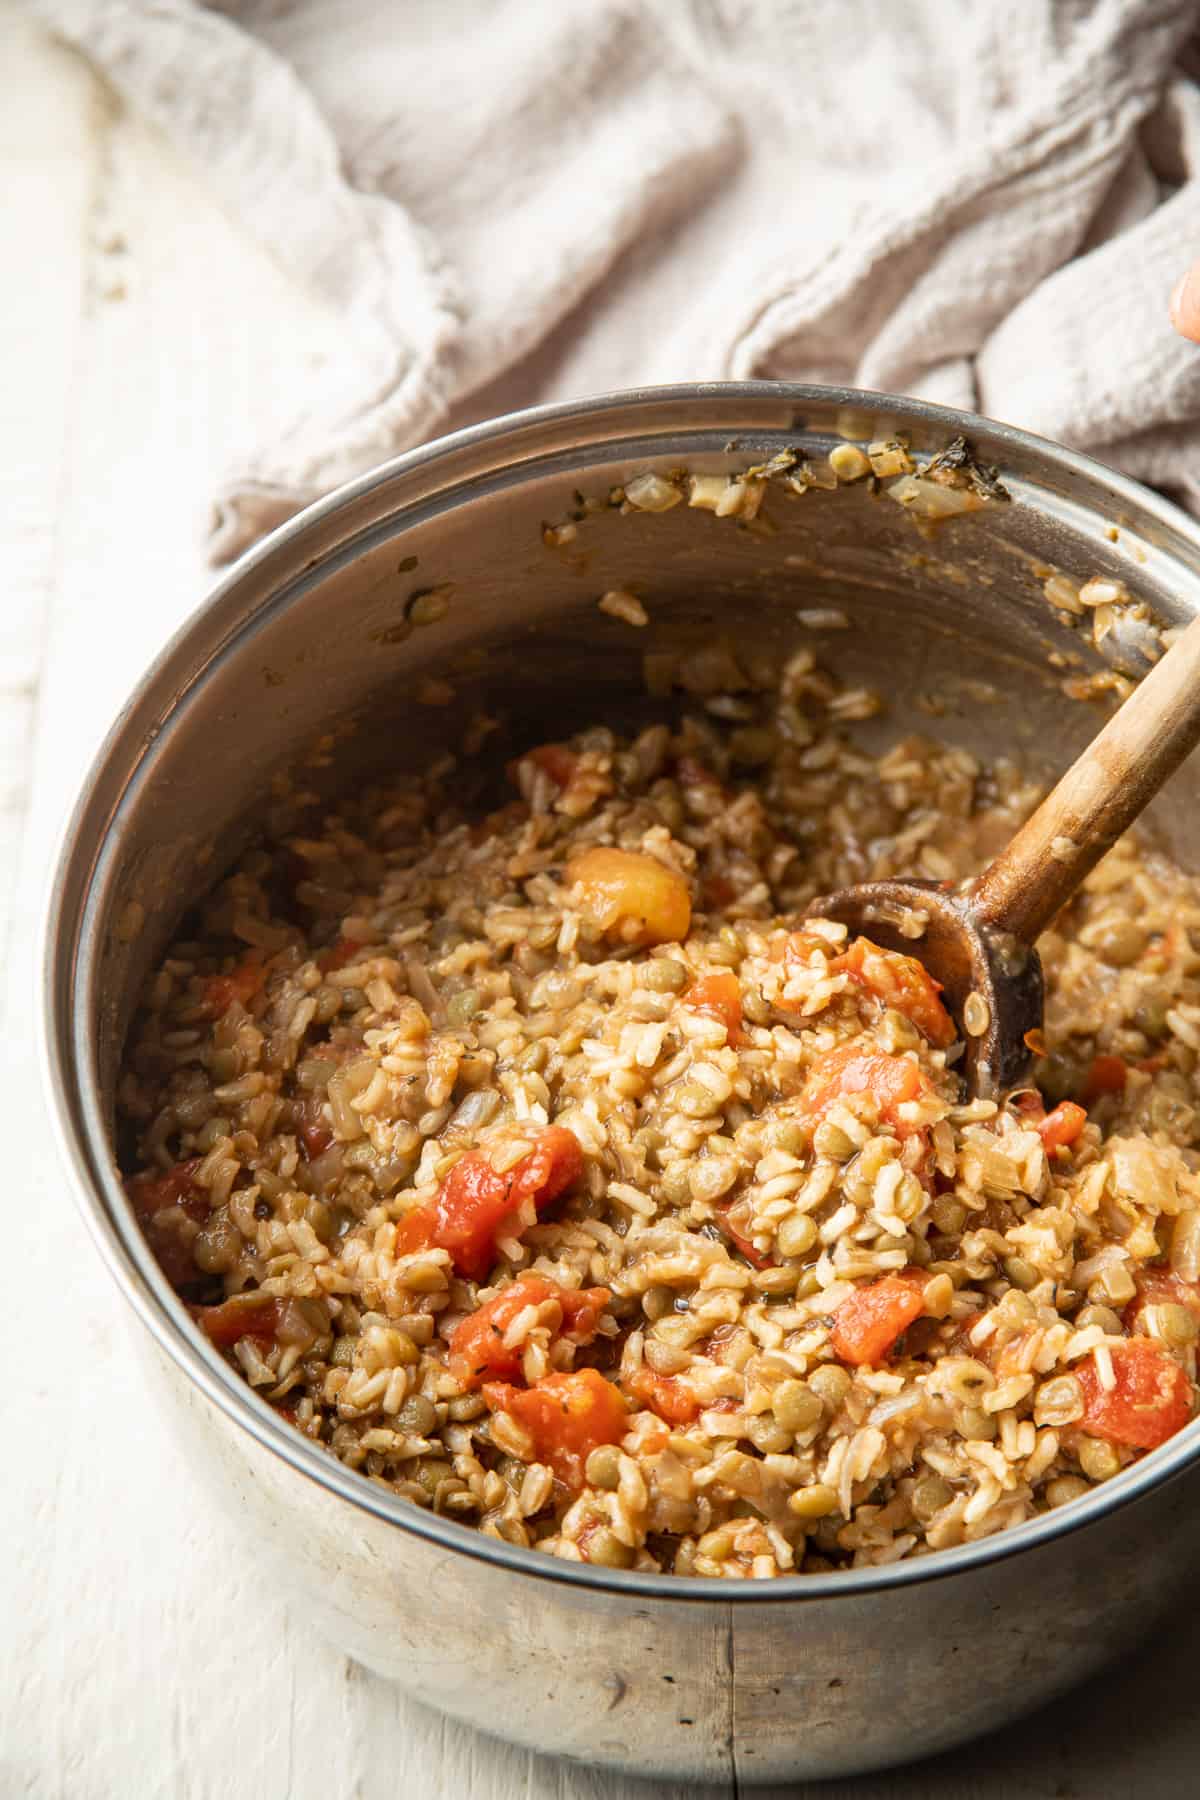 Rice, lentils and tomatoes in a saucepan with wooden spoon.